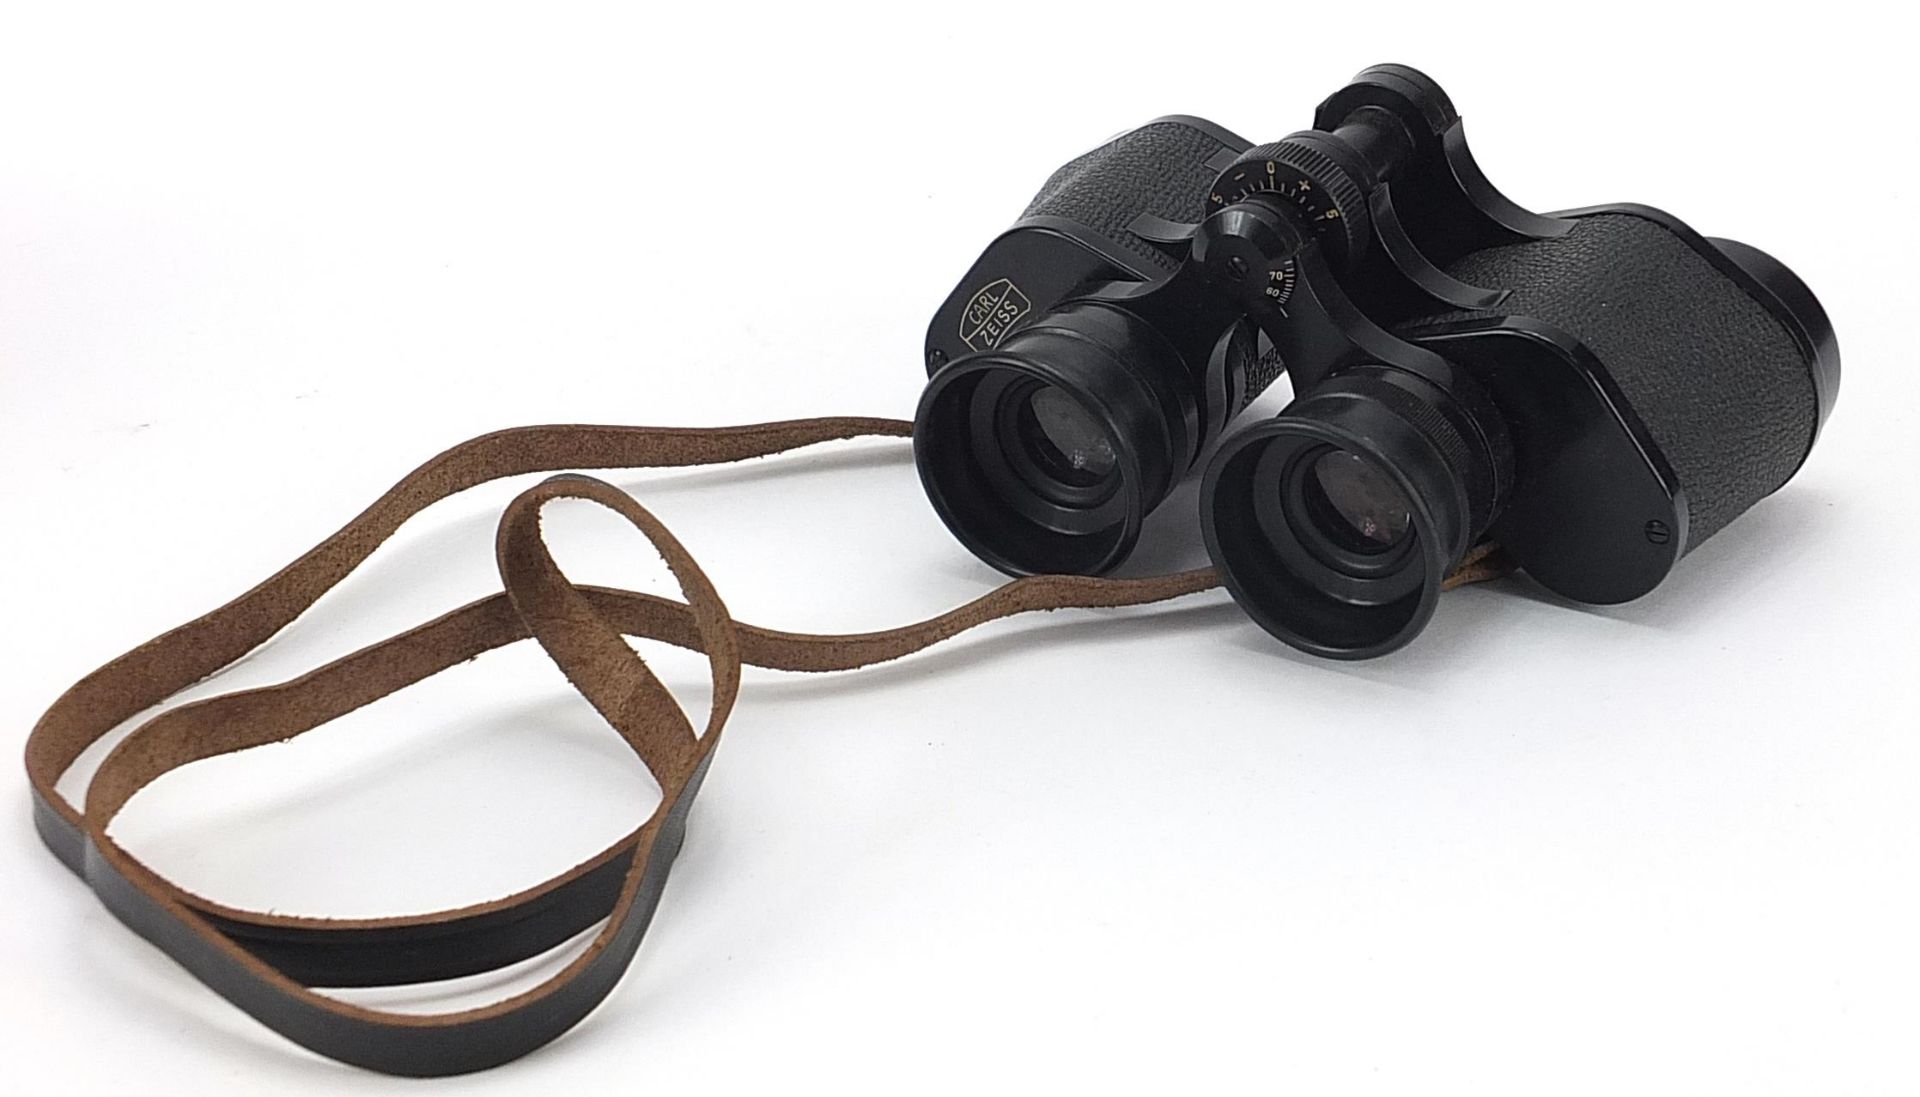 Pair of Carl Zeiss Jena 8 x 30 B binoculars with case - Image 3 of 4